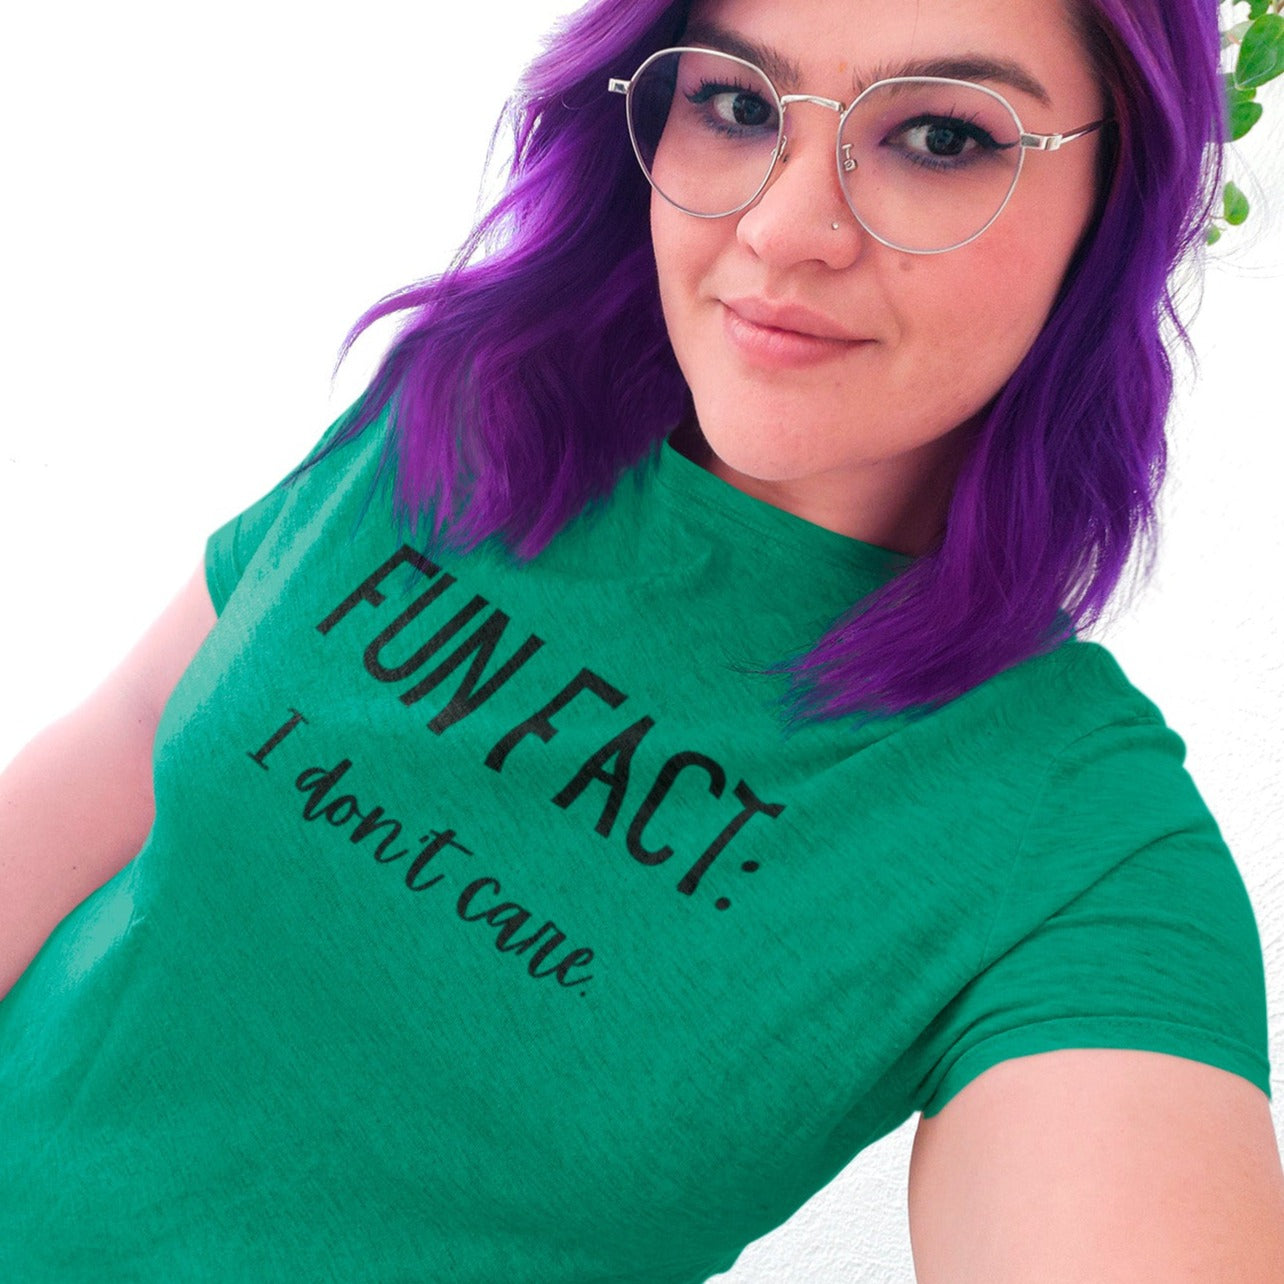 fun-fact-i-dont-care-funny-heatherd-kelly-t-shirt-womens-sarcastic-mockup-of-a-woman-with-purple-hair-taking-a-selfie